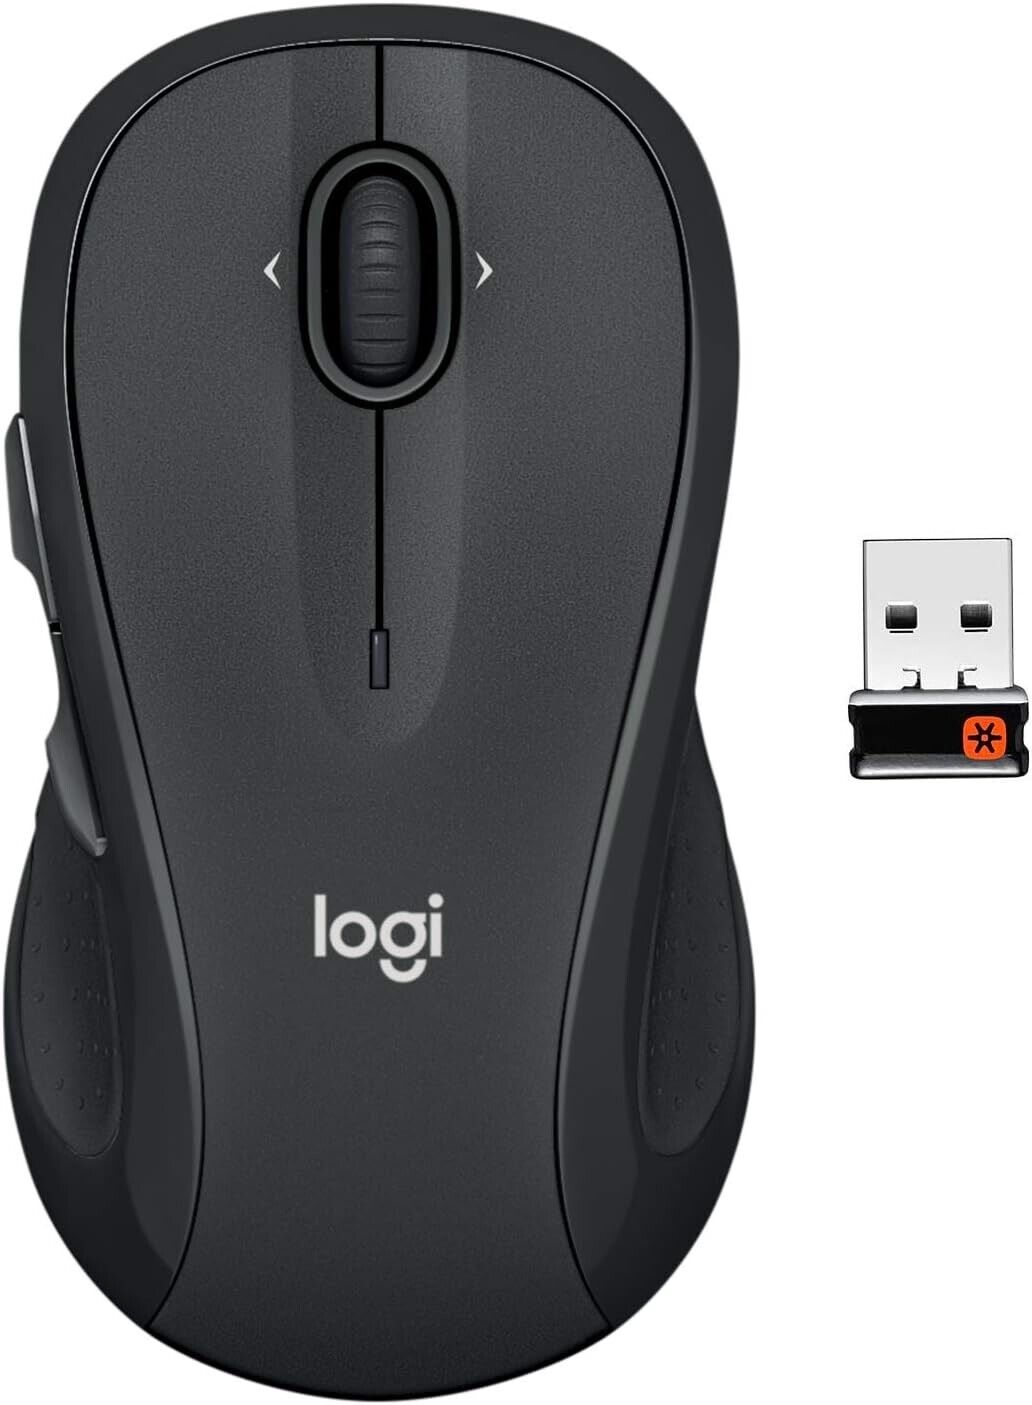 New Logitech M510 Wireless Laser Mouse for PC/MAC with Unifying Receiver - Gray